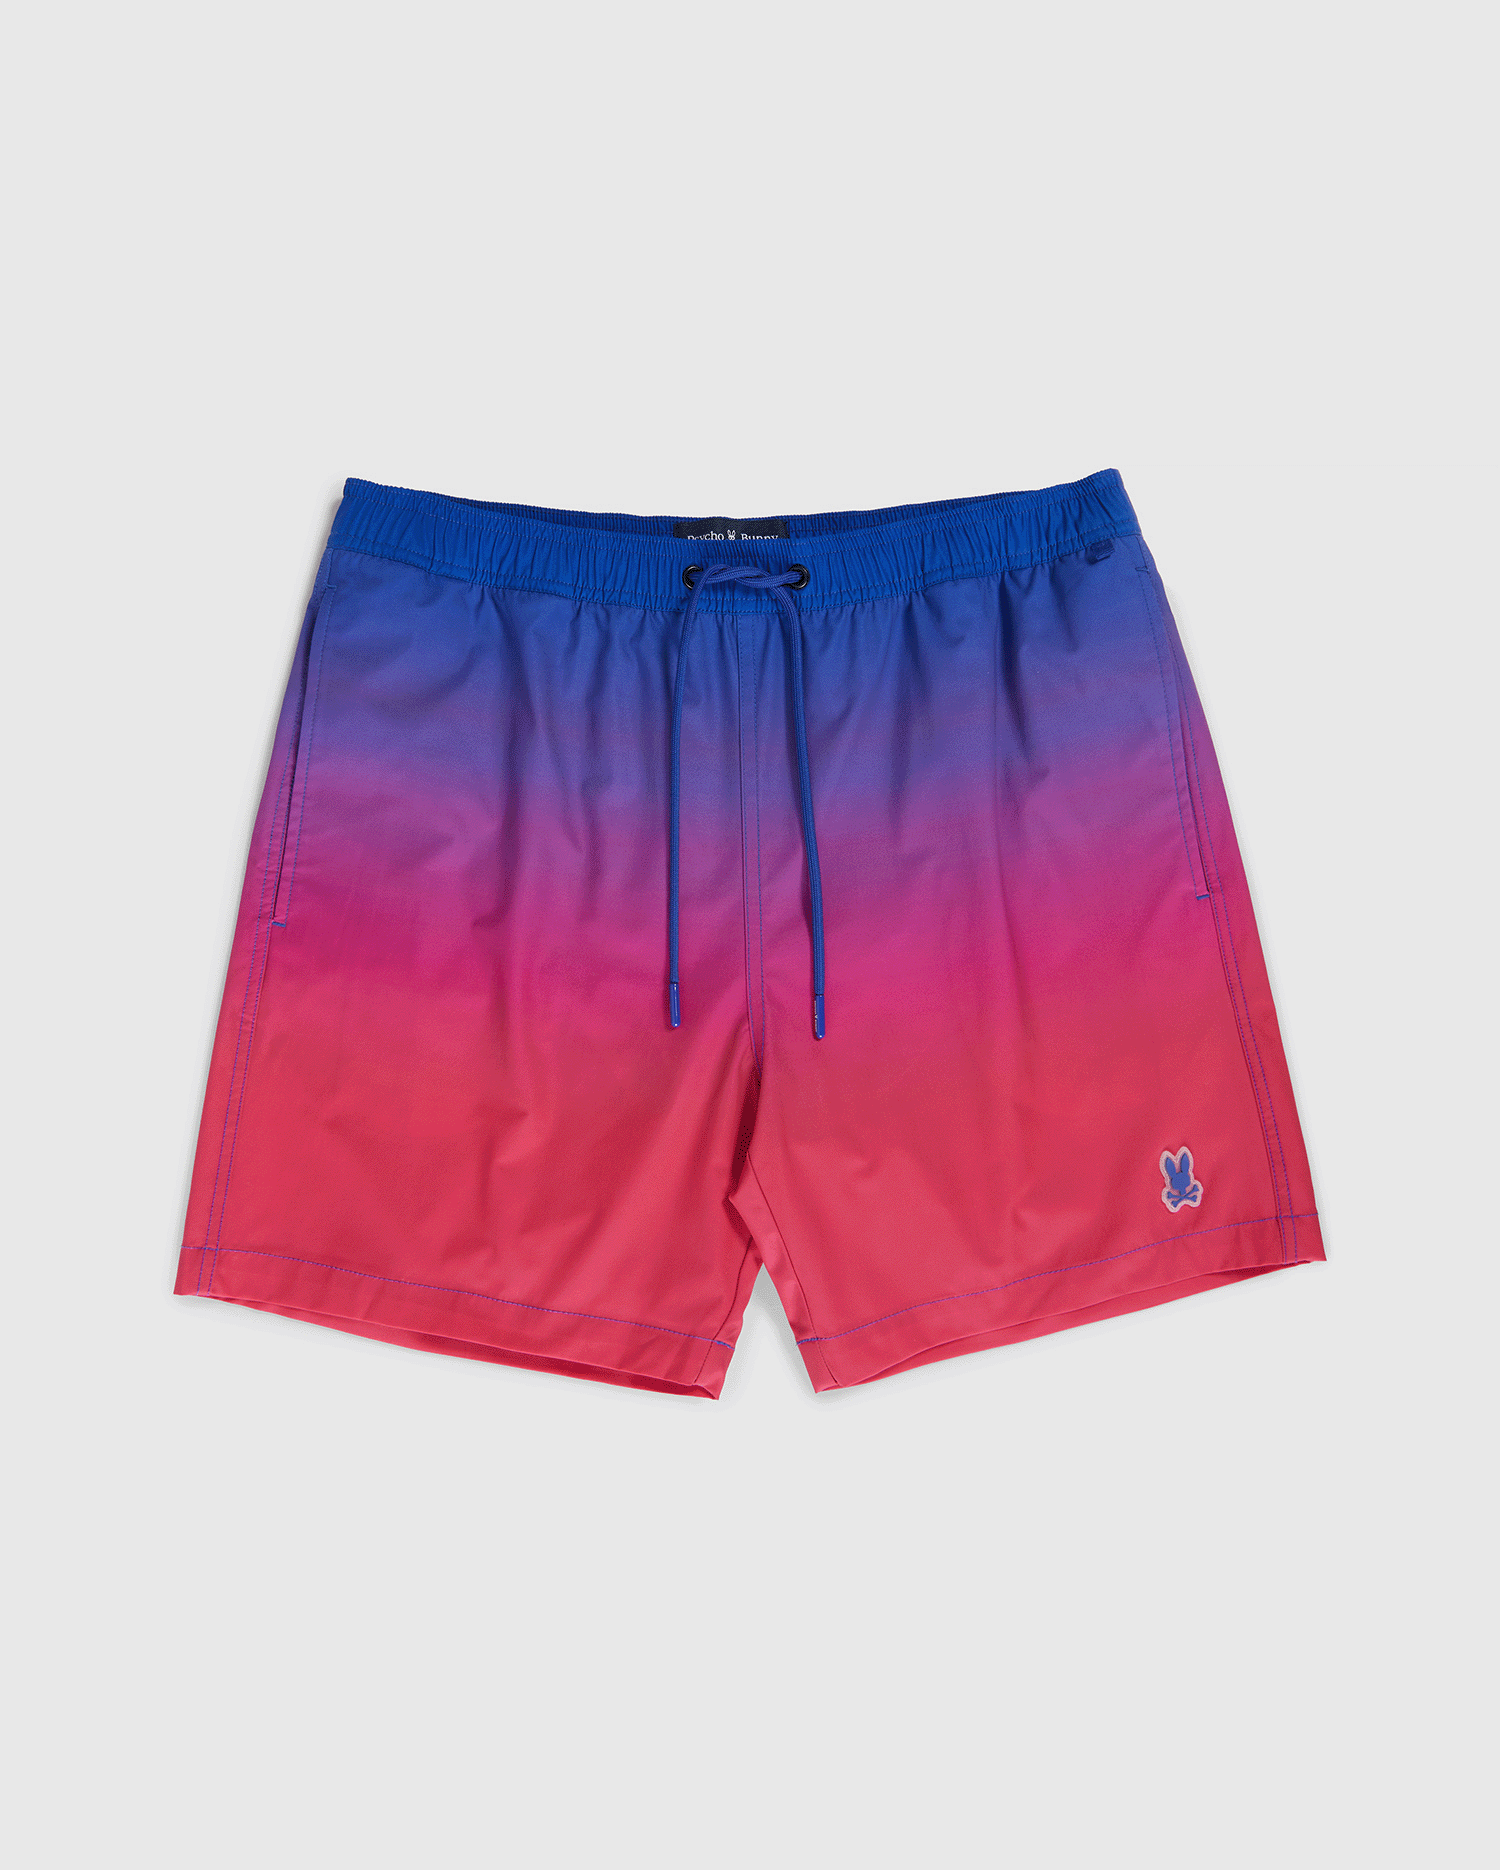 A pair of Psycho Bunny MENS MALTA HYDROCHROMIC SWIM TRUNK - B6W173B2SW with an ombré design that transitions from blue at the top to pink at the bottom. They feature an elastic waistband with a drawstring and a small embroidered Bunny pattern on the left leg.